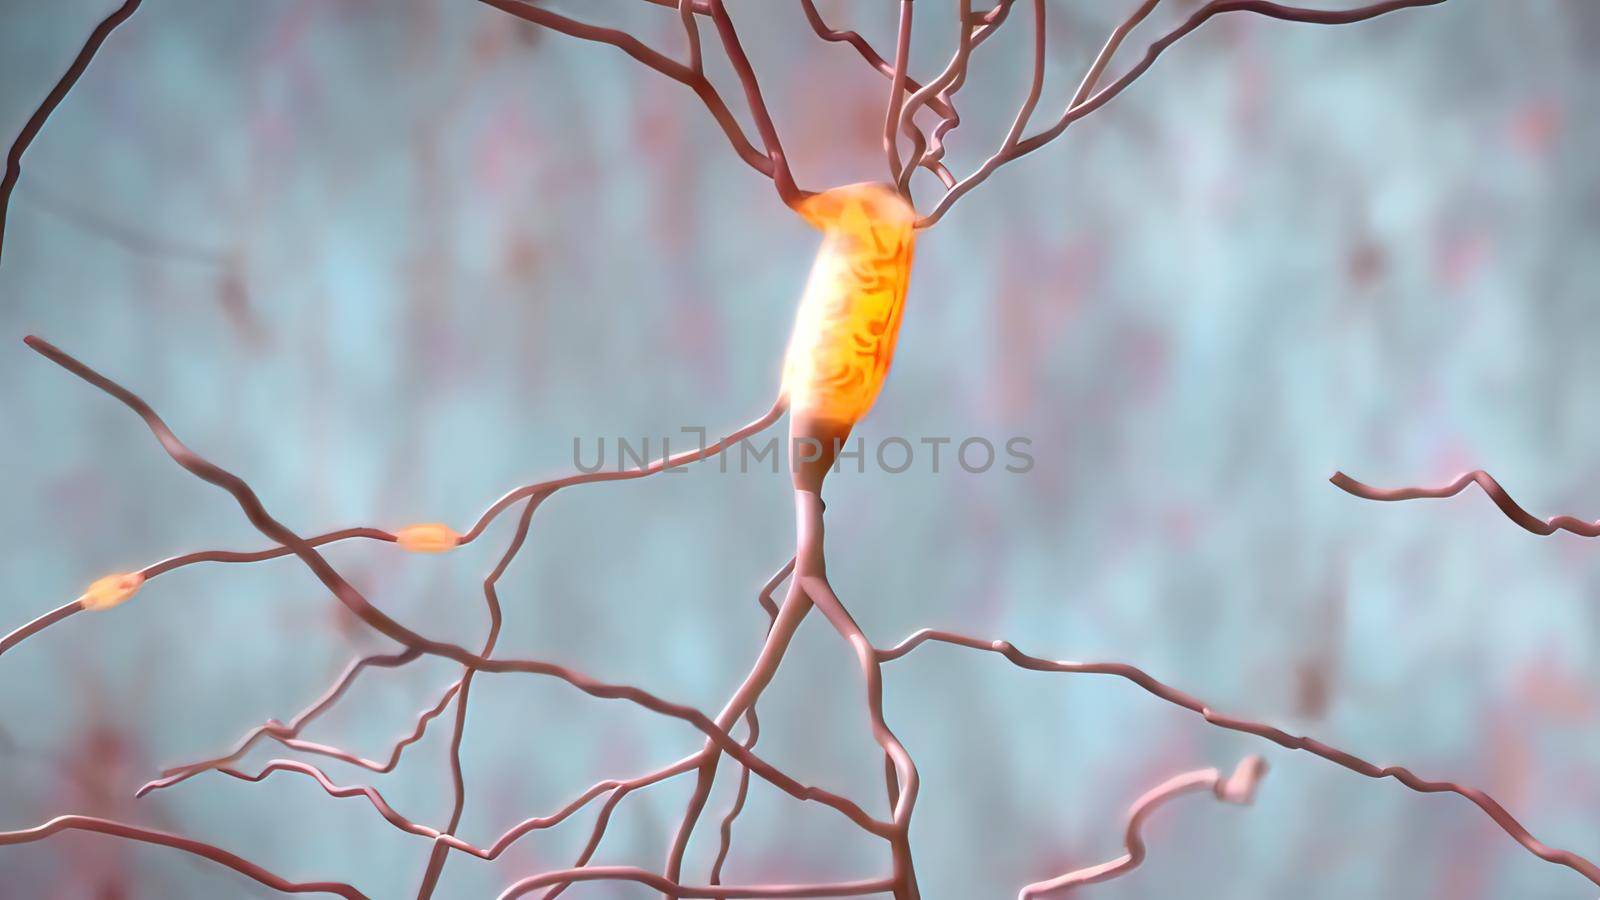 Neurotransmitters are chemical messengers in the body by creativepic